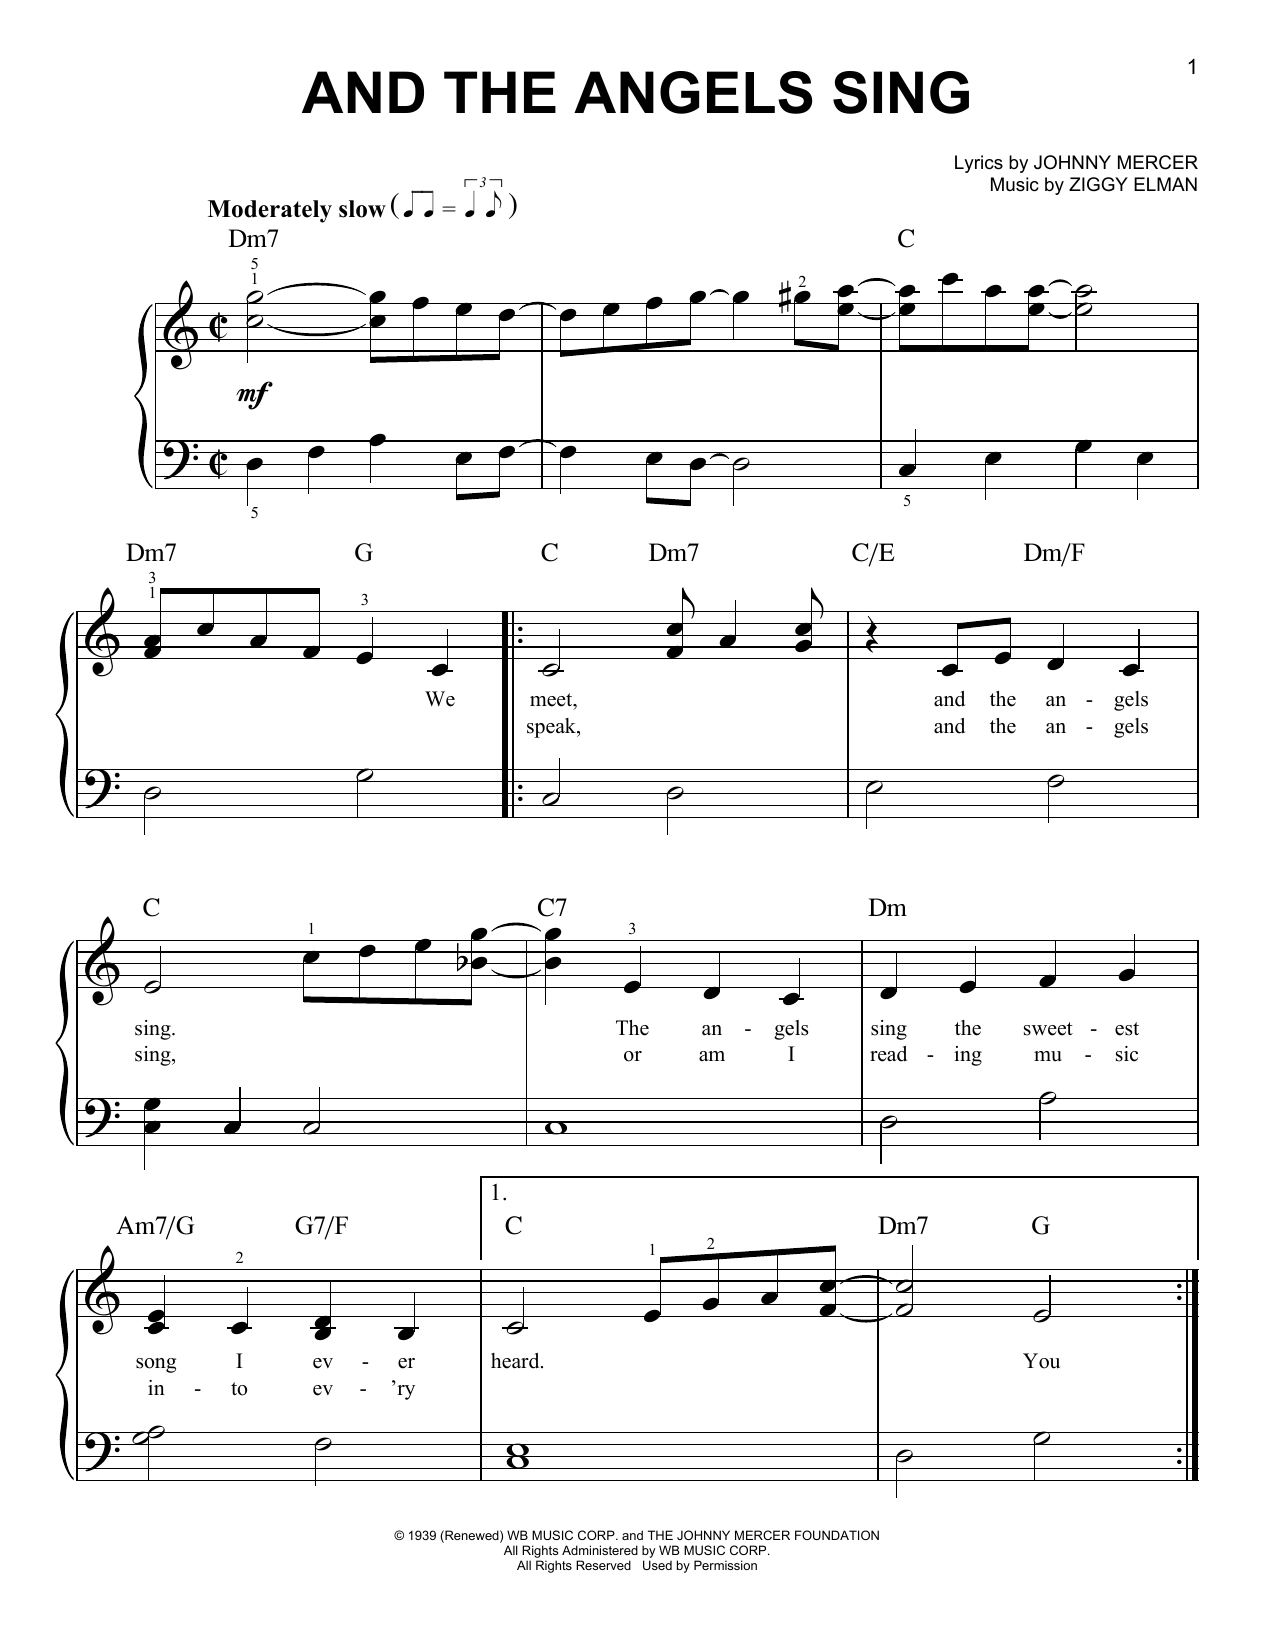 Download Benny Goodman And The Angels Sing Sheet Music